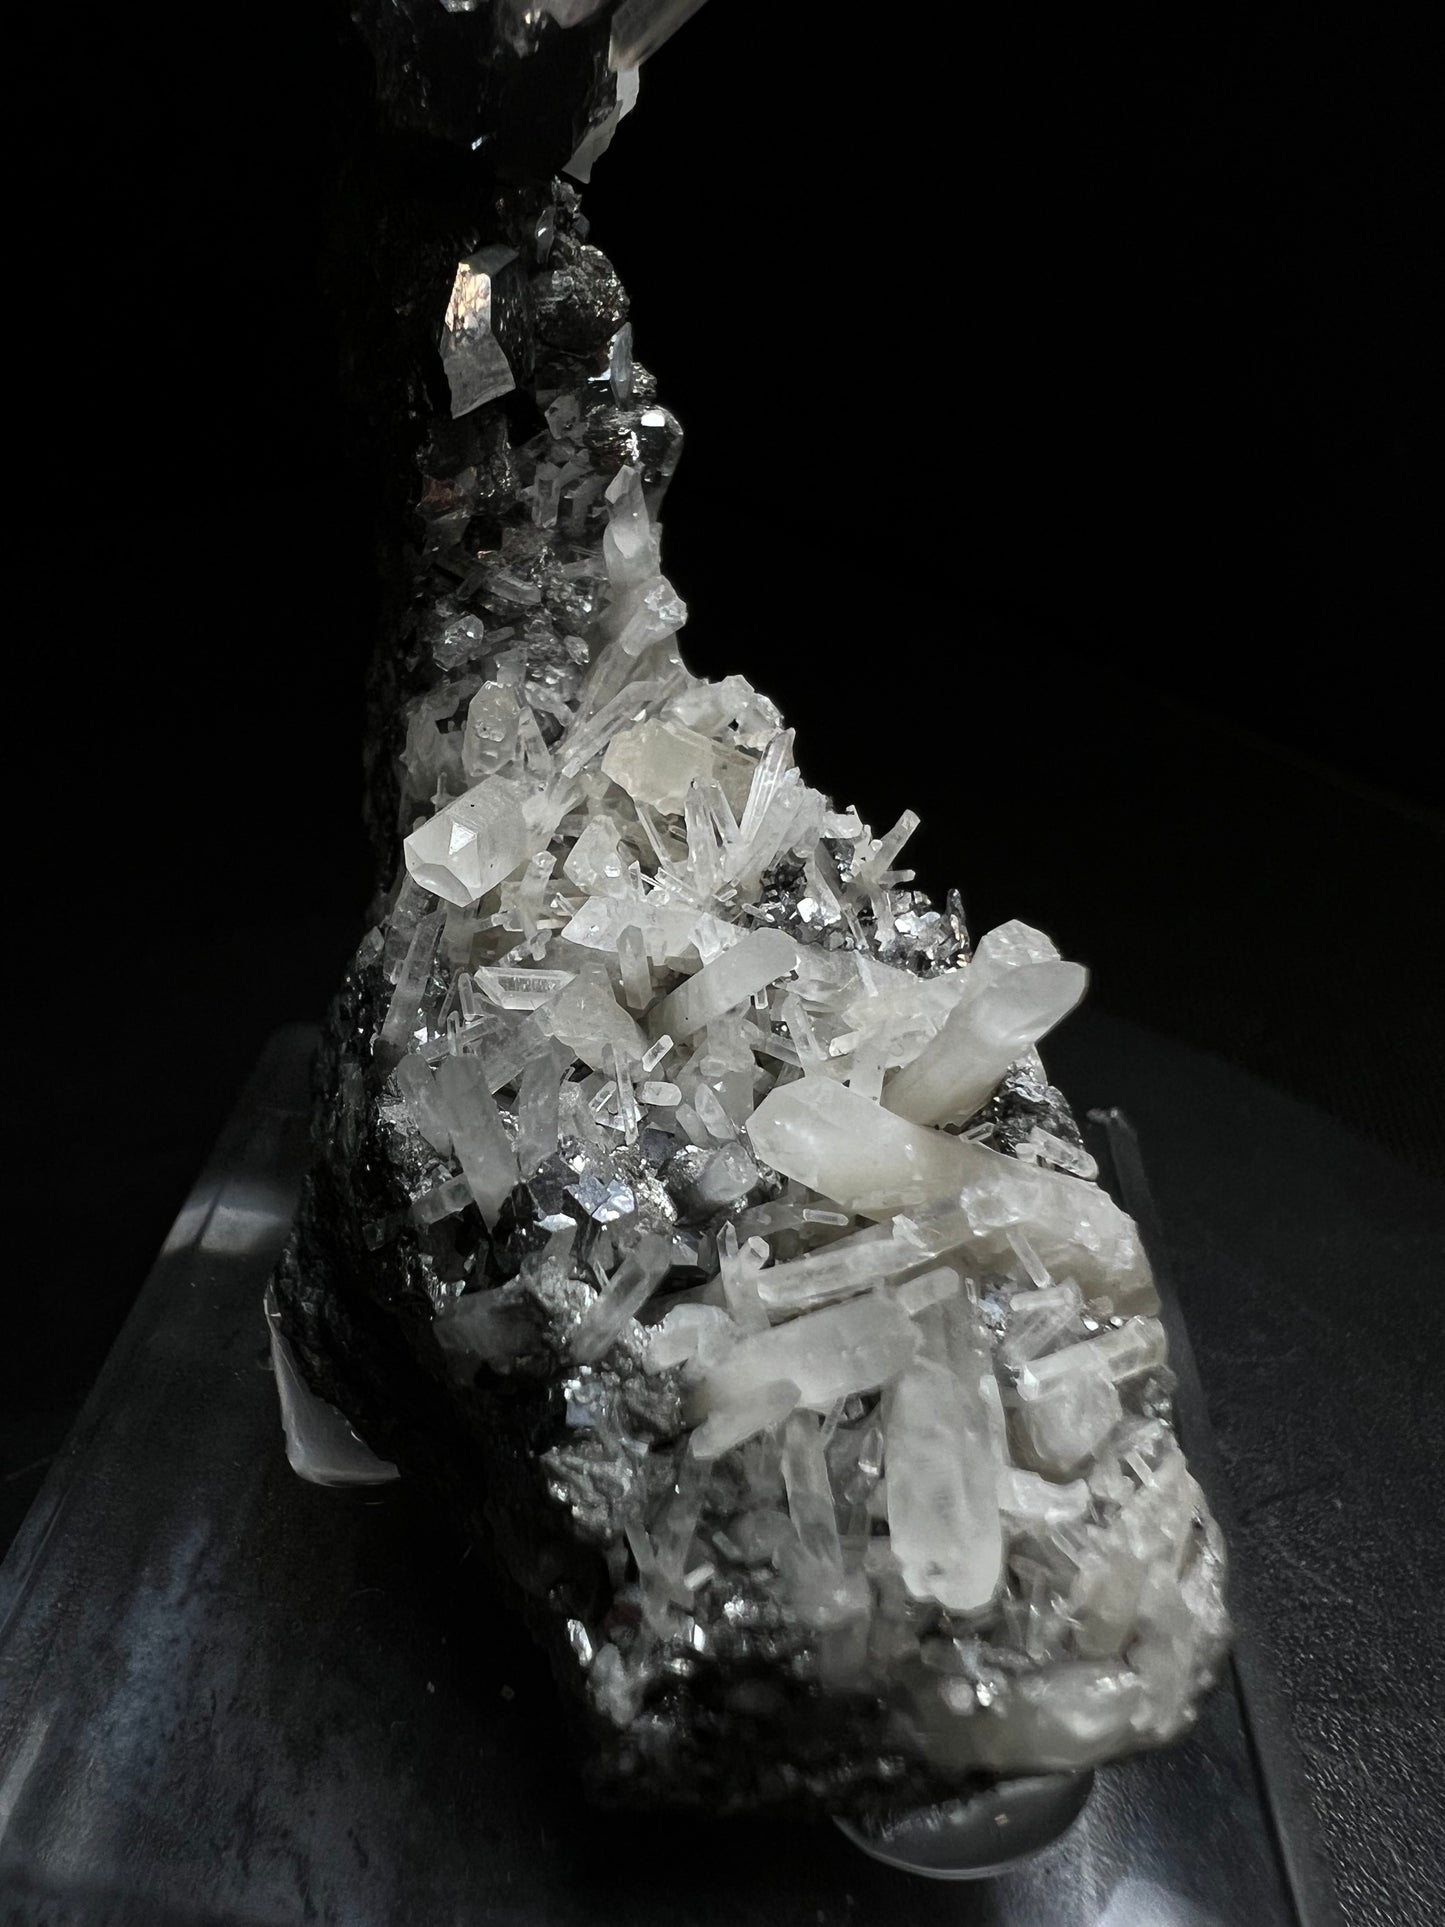 Aesthetic Skutterudite With Quartz From Morocco (Stand Included) Collectors Piece